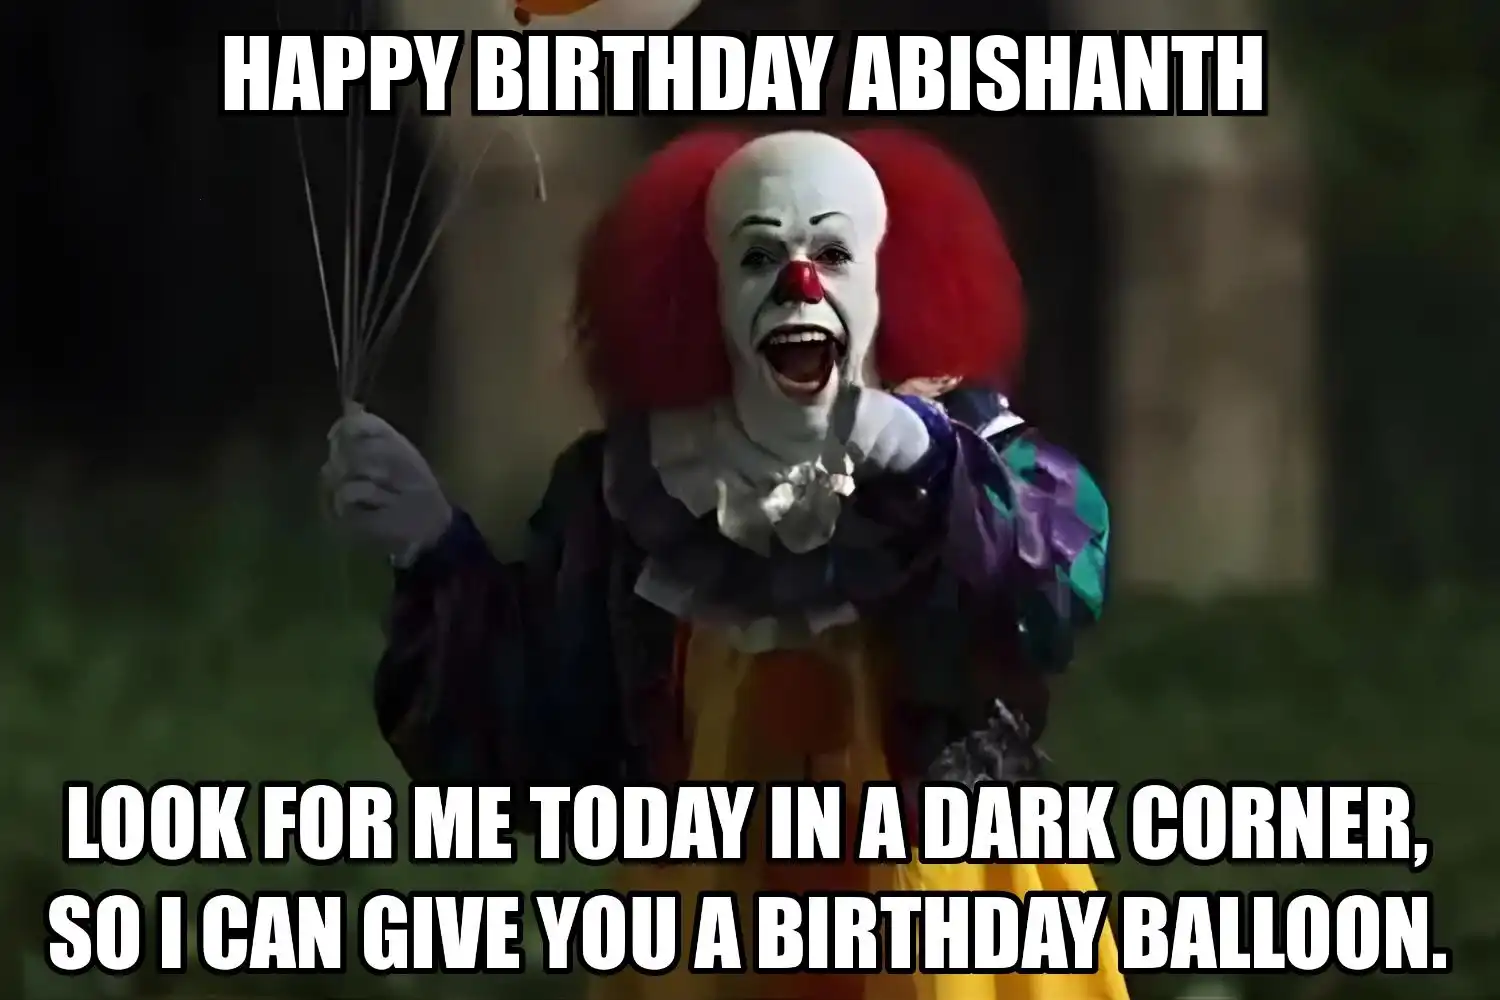 Happy Birthday Abishanth I Can Give You A Balloon Meme